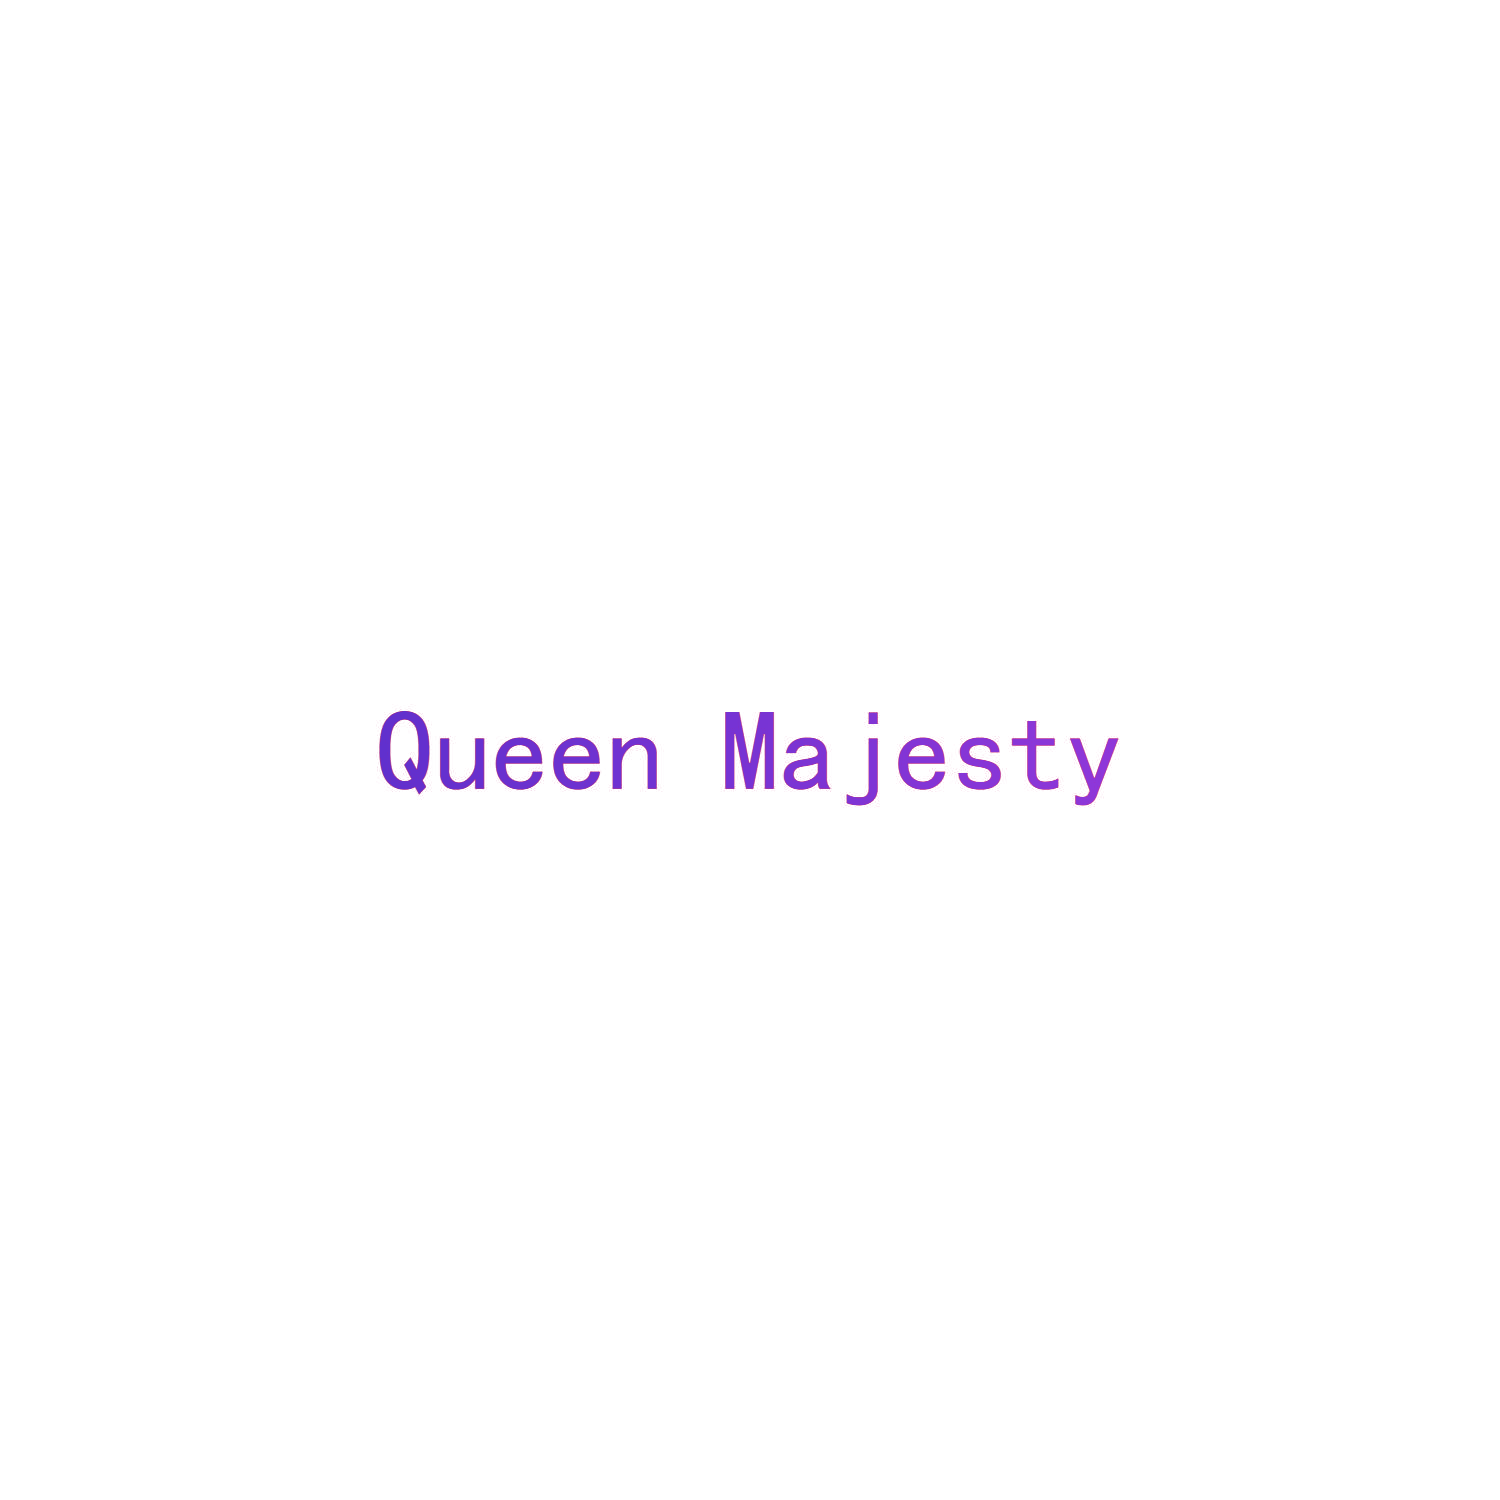 QUEEN MAJESTY